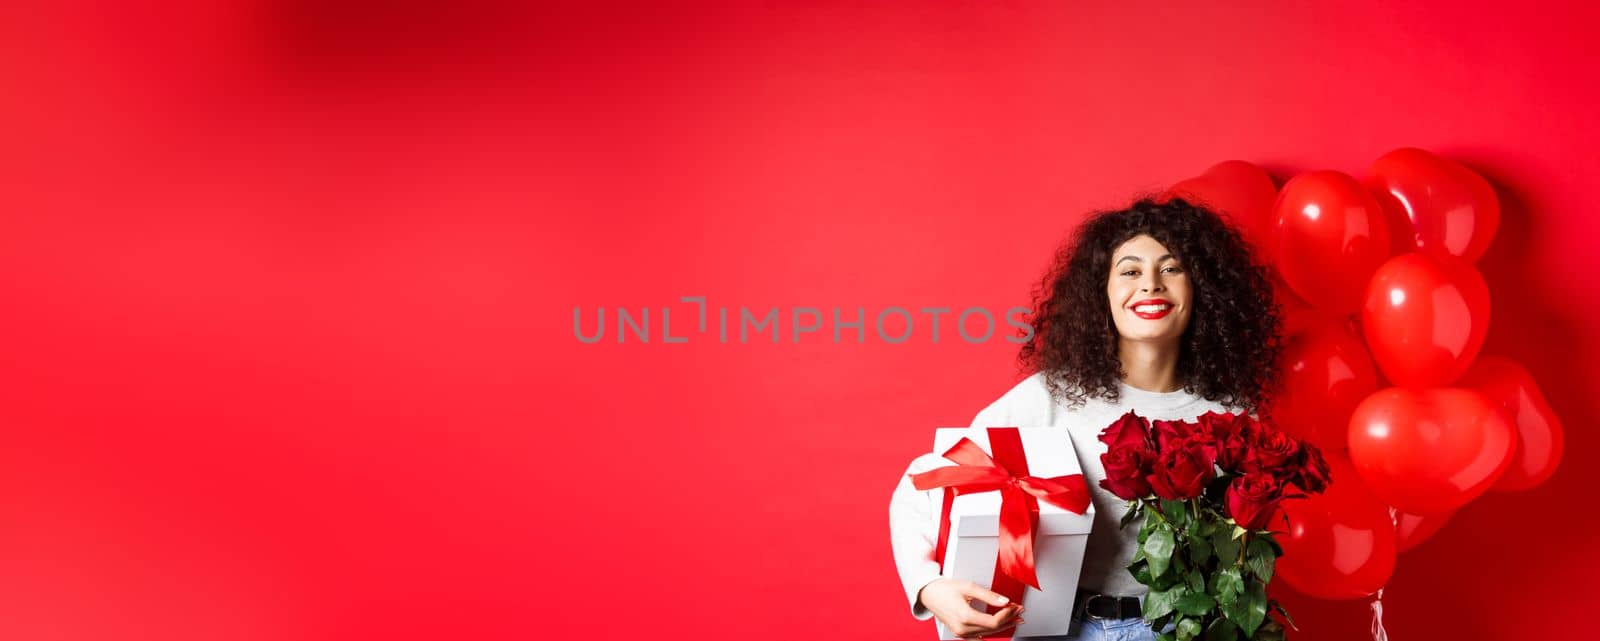 Smiling happy woman holding box with gift and red roses from boyfriend, celebrating Valentines day, standing near romantic hearts balloons, standing over studio background.